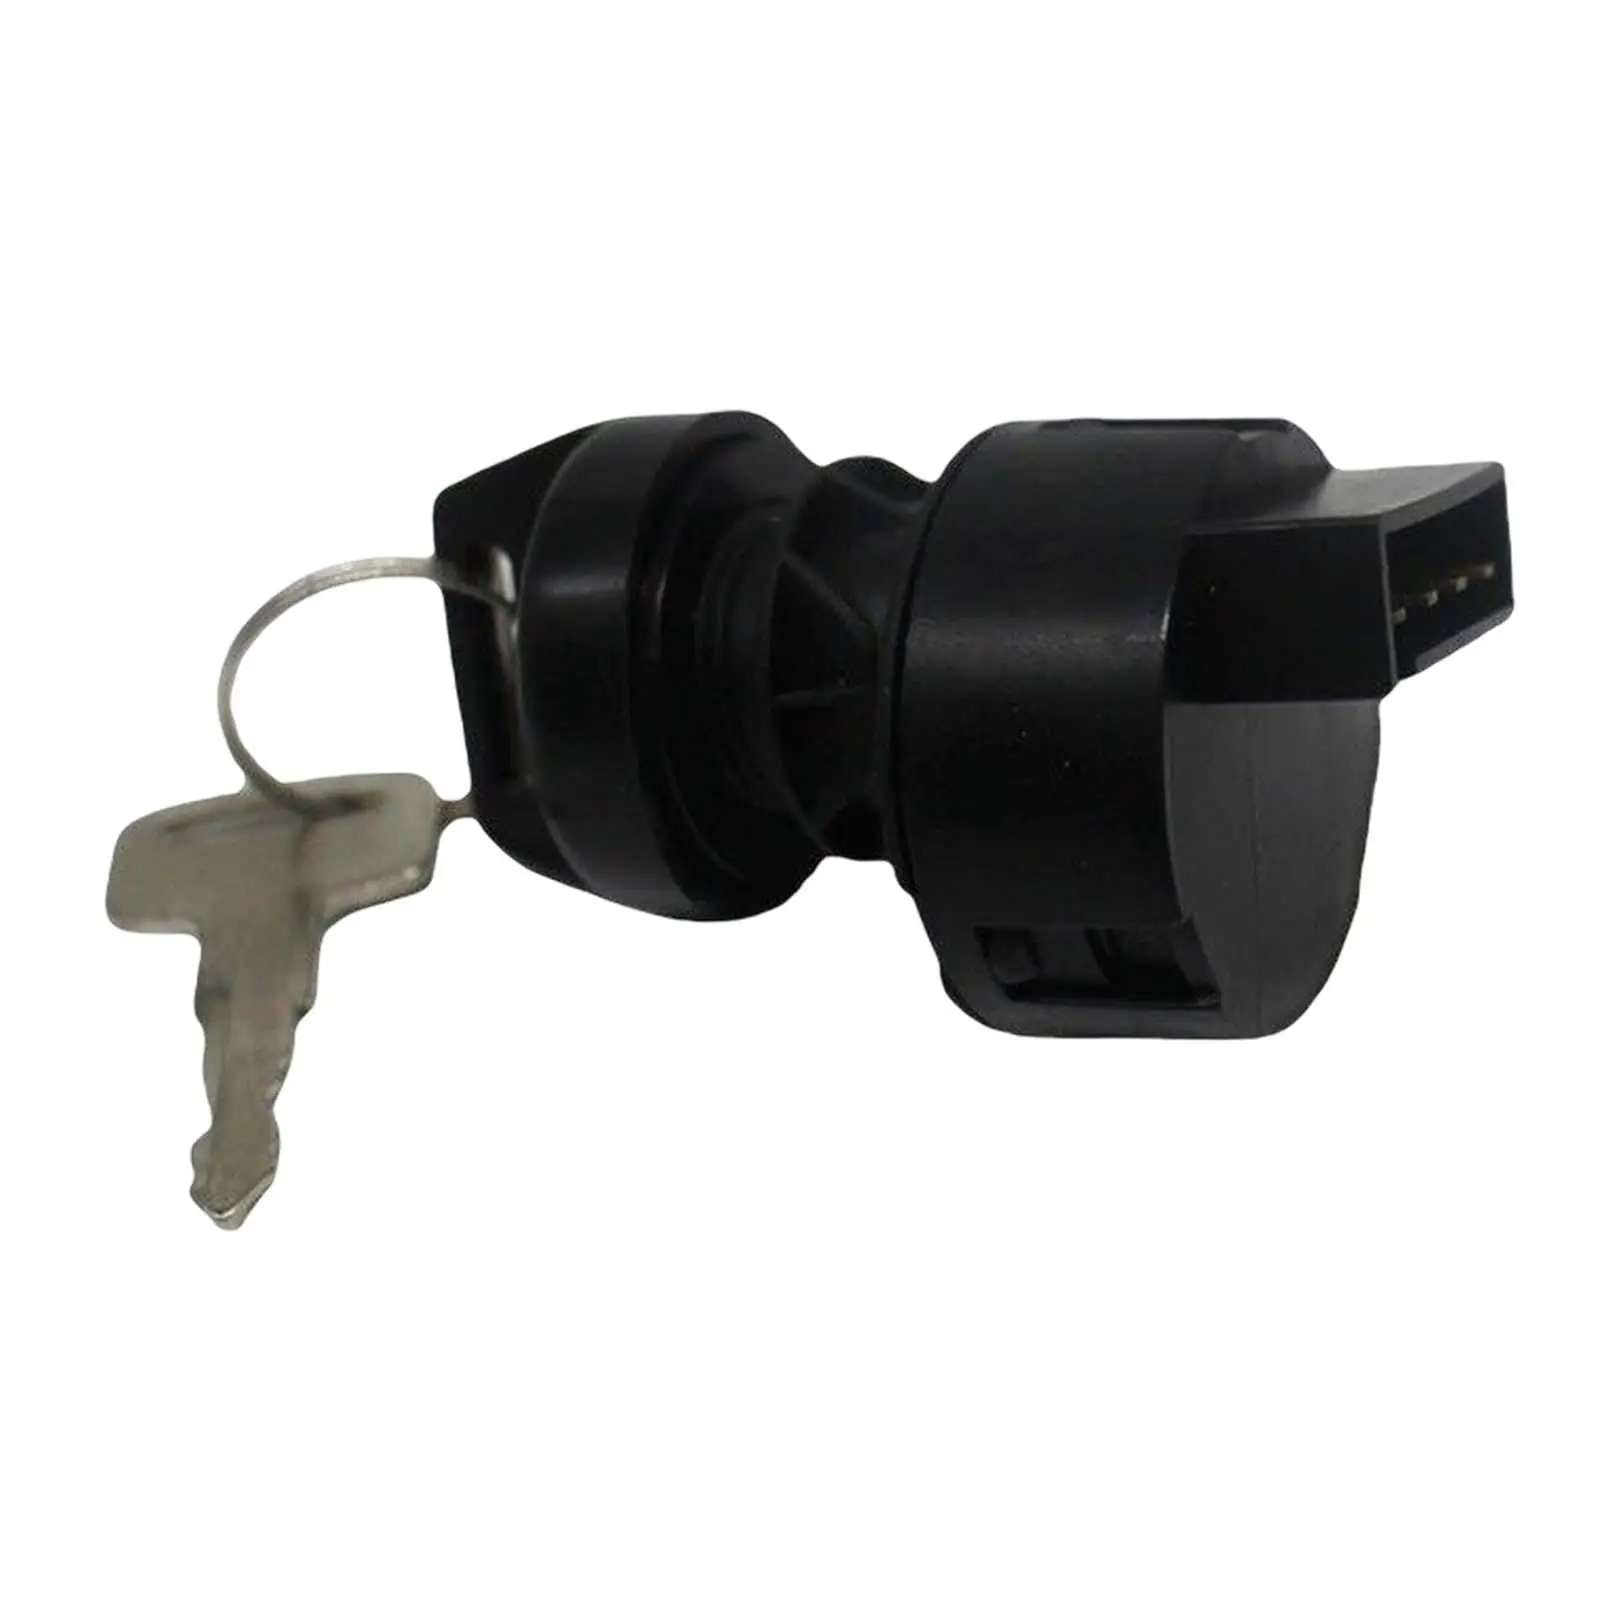 Ignition Switch Lock Accessory Replacement with 2 Keys Easy to Install Premium Parts Professional for 335 400 500 600